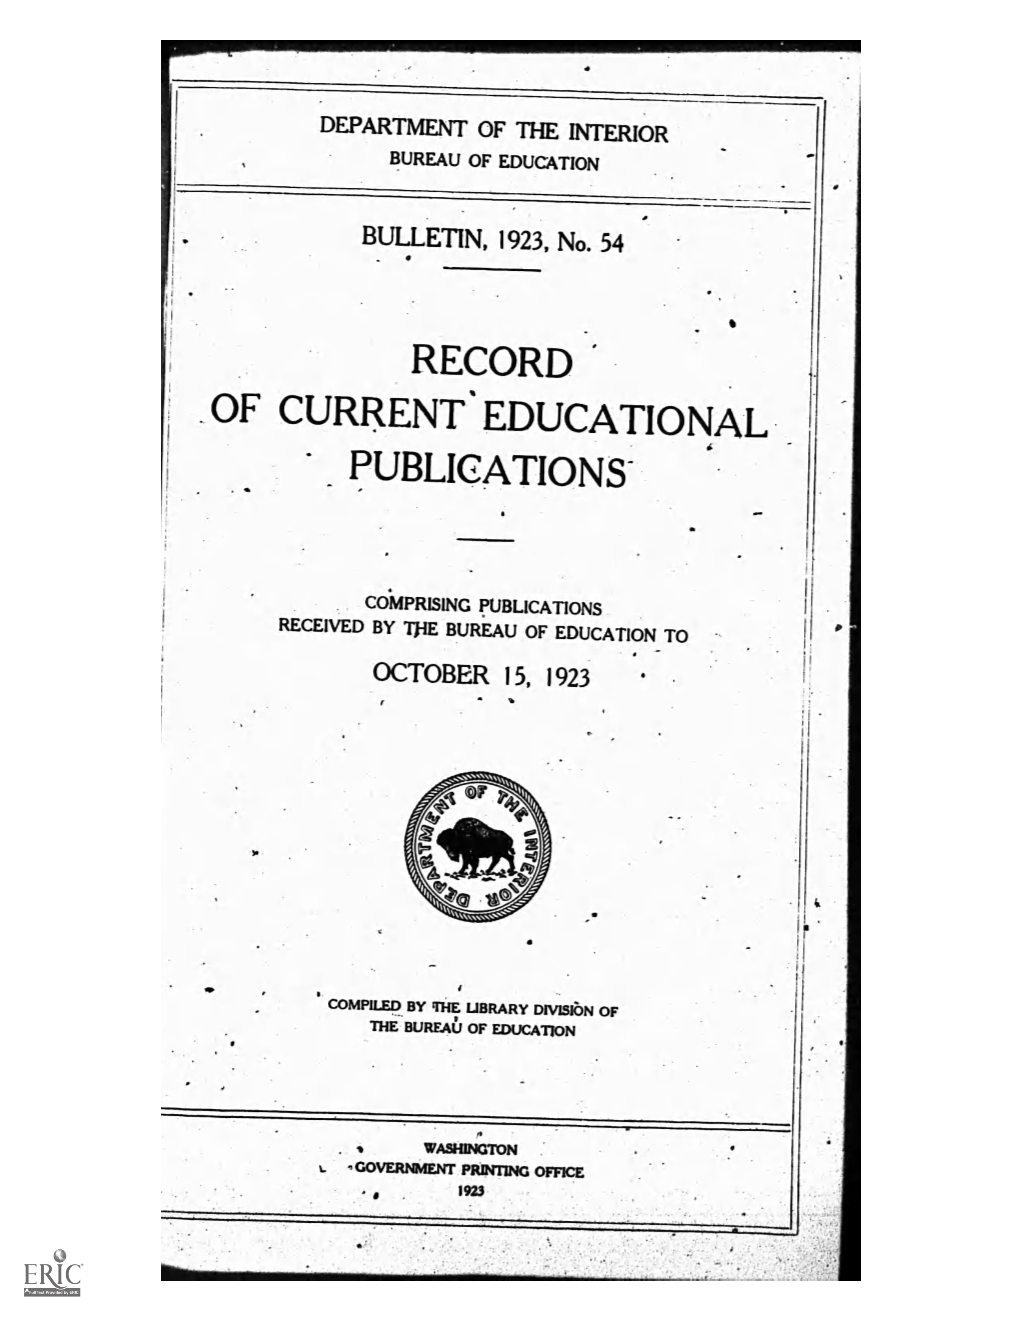 Record of Current*Educational Publications